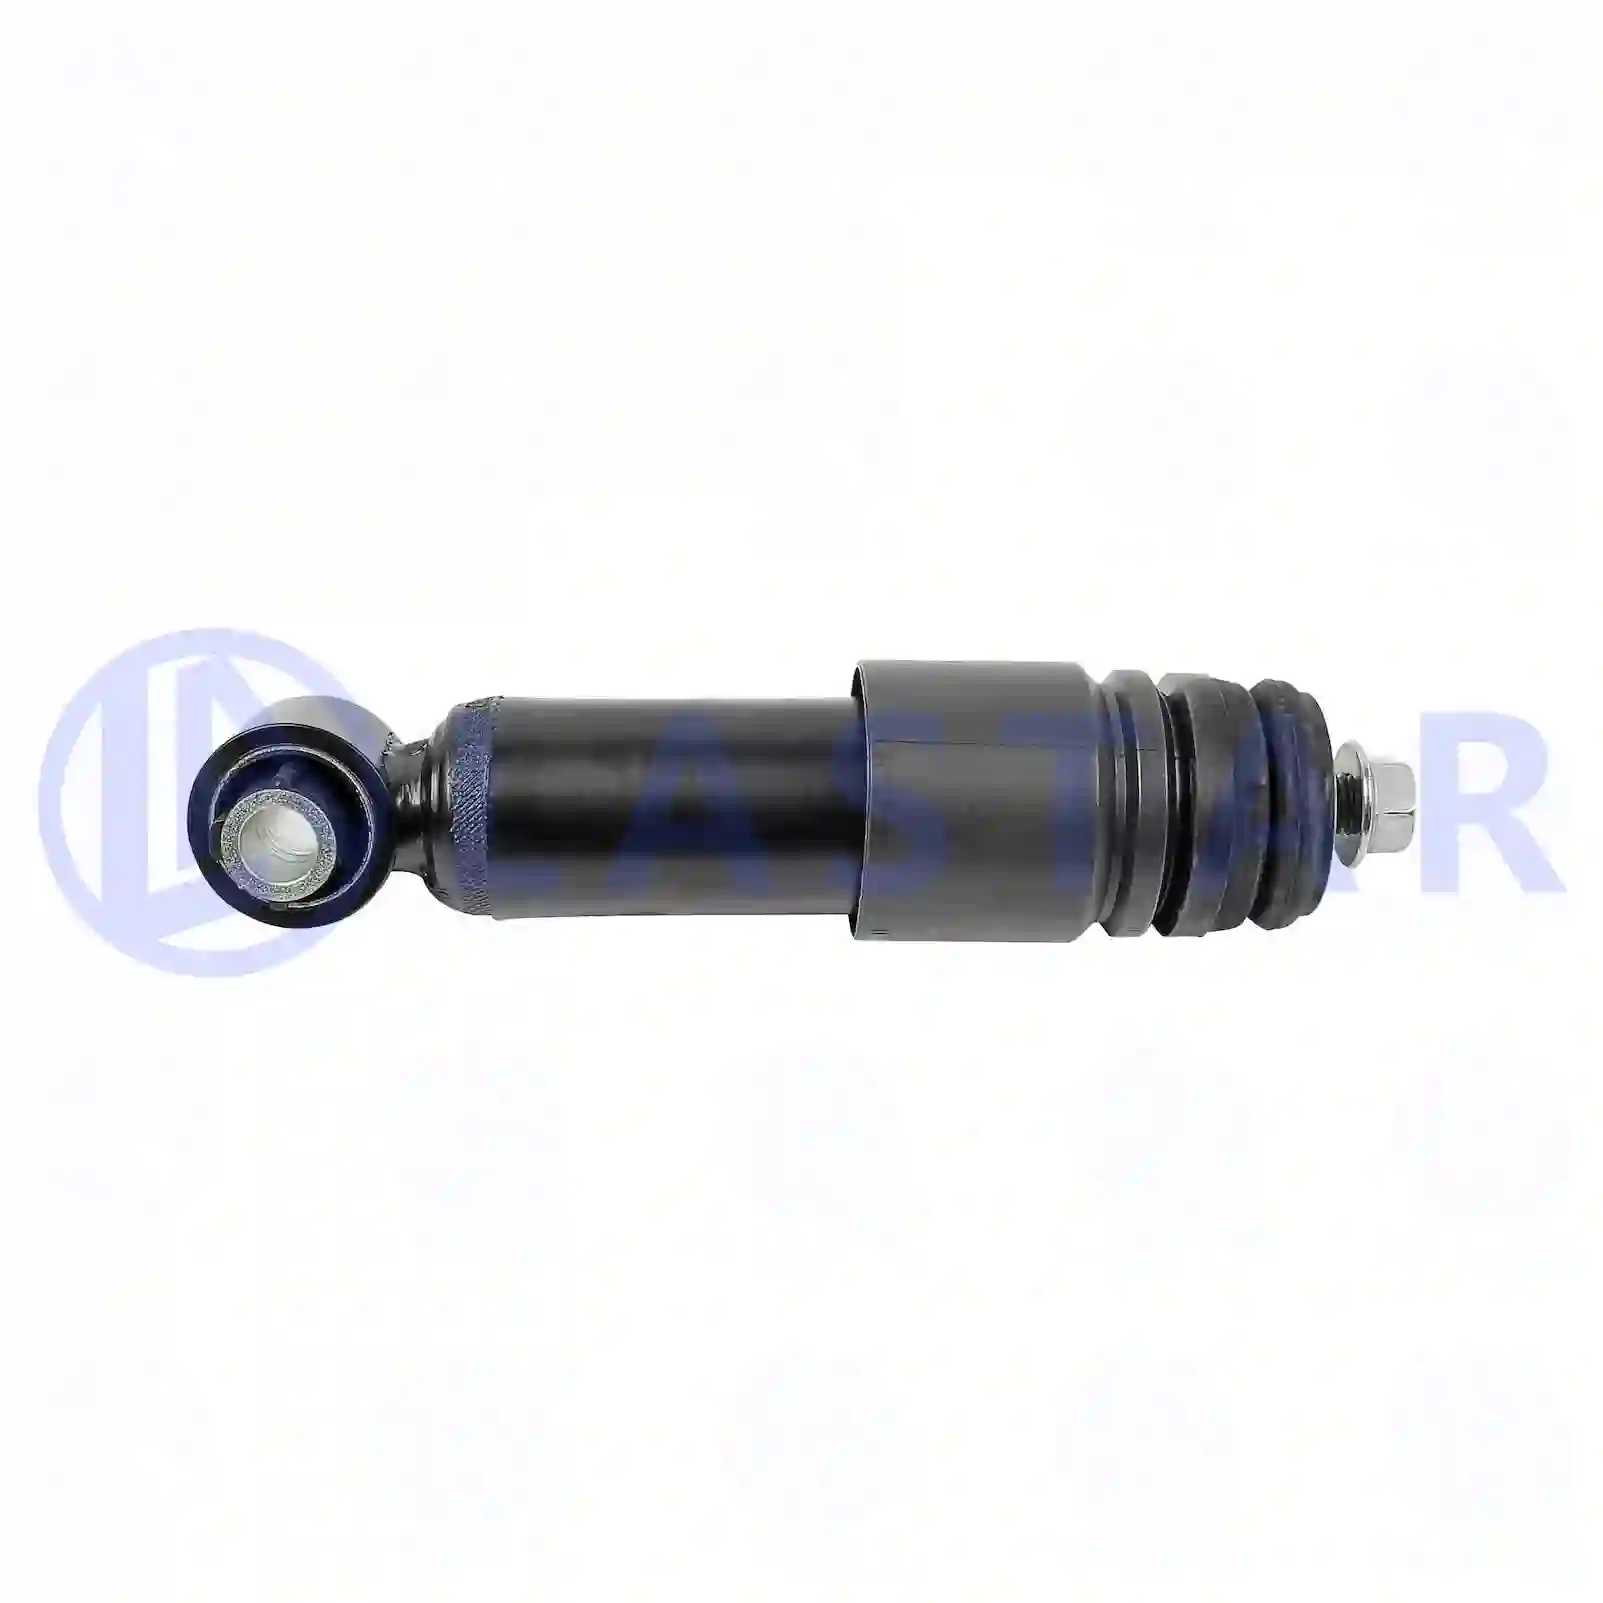 Cabin shock absorber, 77727091, 21171975, 22128971, , , ||  77727091 Lastar Spare Part | Truck Spare Parts, Auotomotive Spare Parts Cabin shock absorber, 77727091, 21171975, 22128971, , , ||  77727091 Lastar Spare Part | Truck Spare Parts, Auotomotive Spare Parts